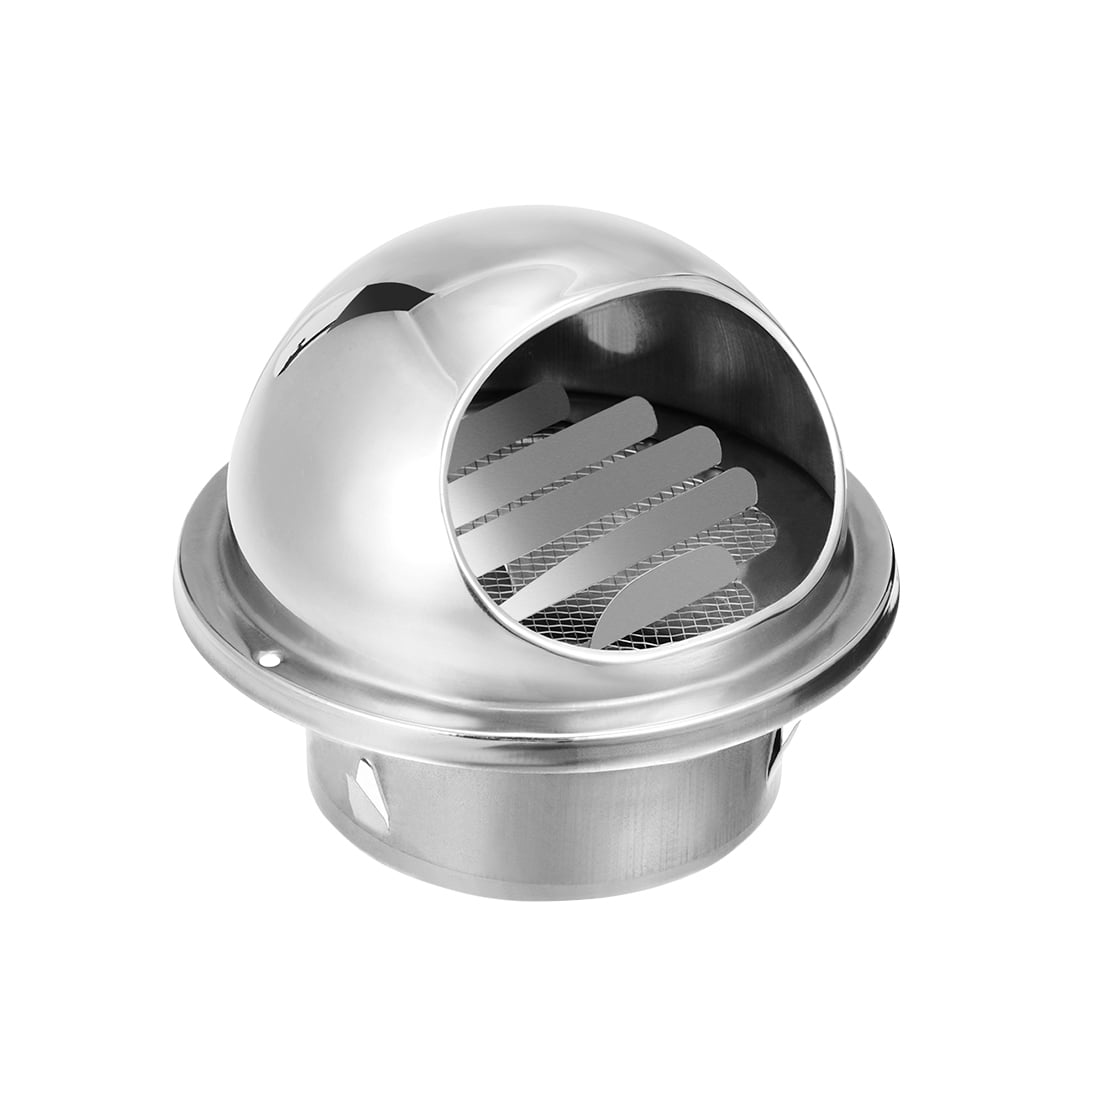 4 Inch Air Vent Round Stainless Steel Mesh Cover Exhaust Vent - Walmart Stainless Steel Air Vent Covers